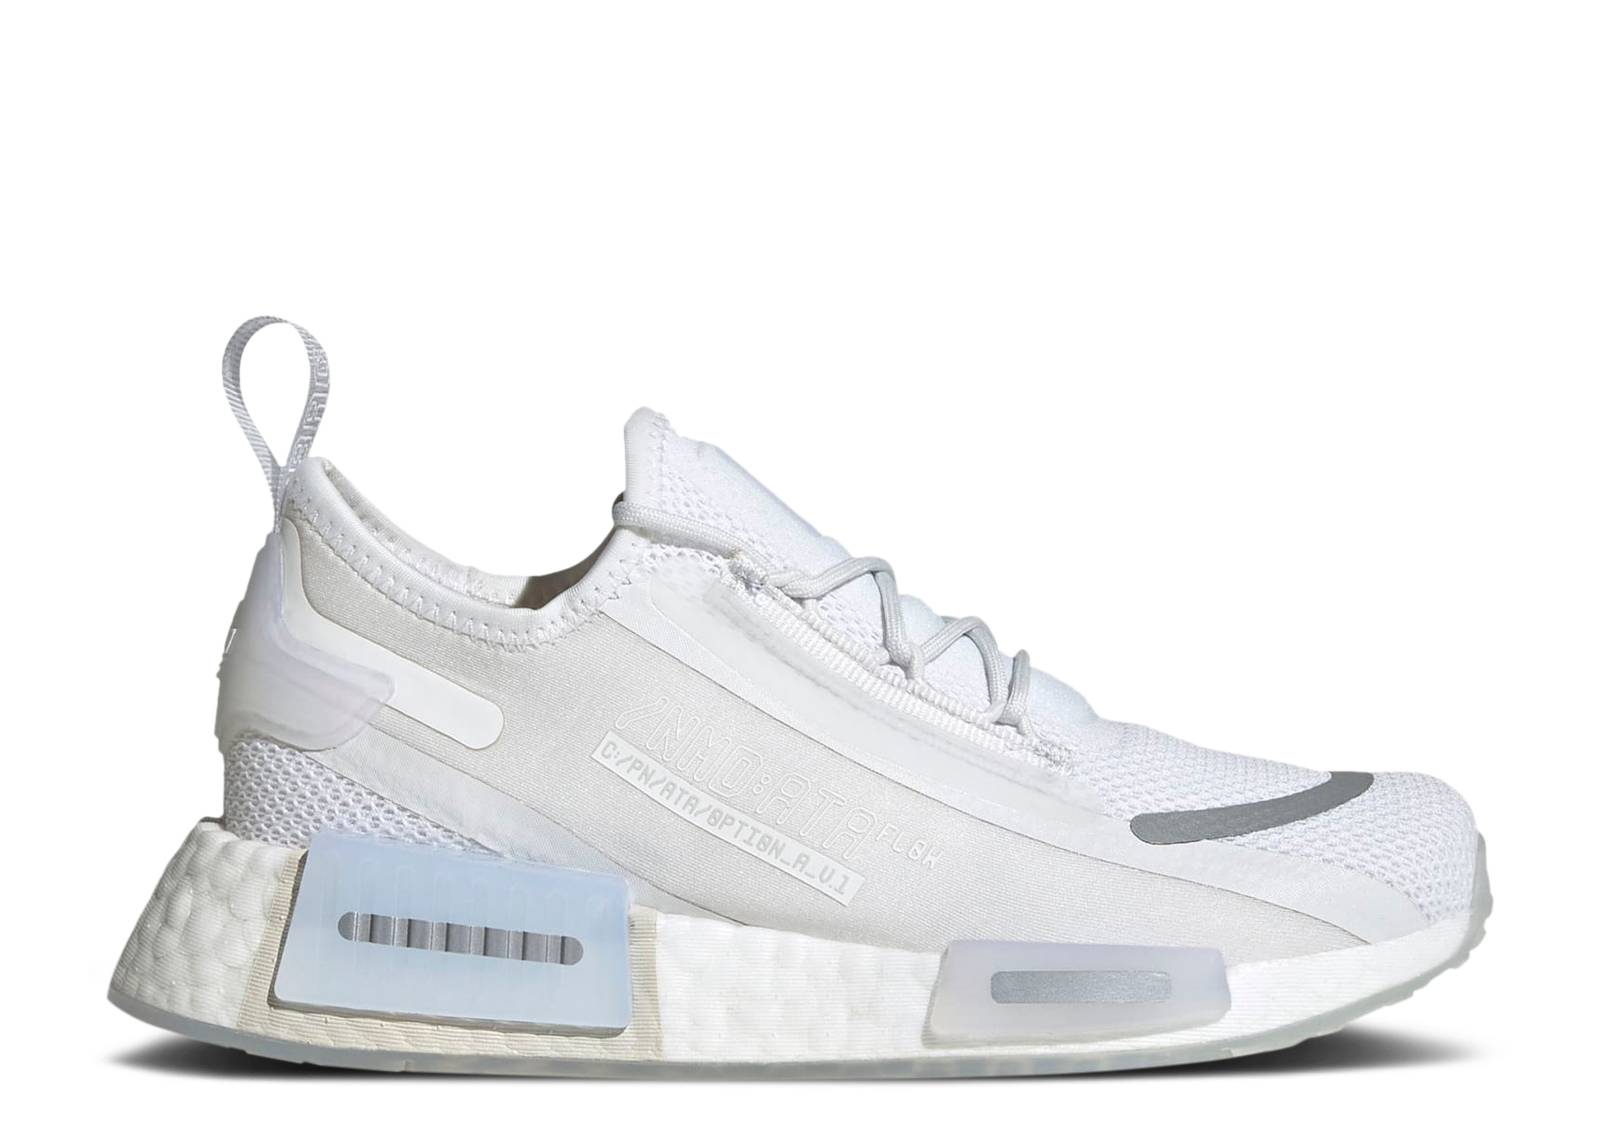 NMD_R1 Spectoo J 'Cloud White'